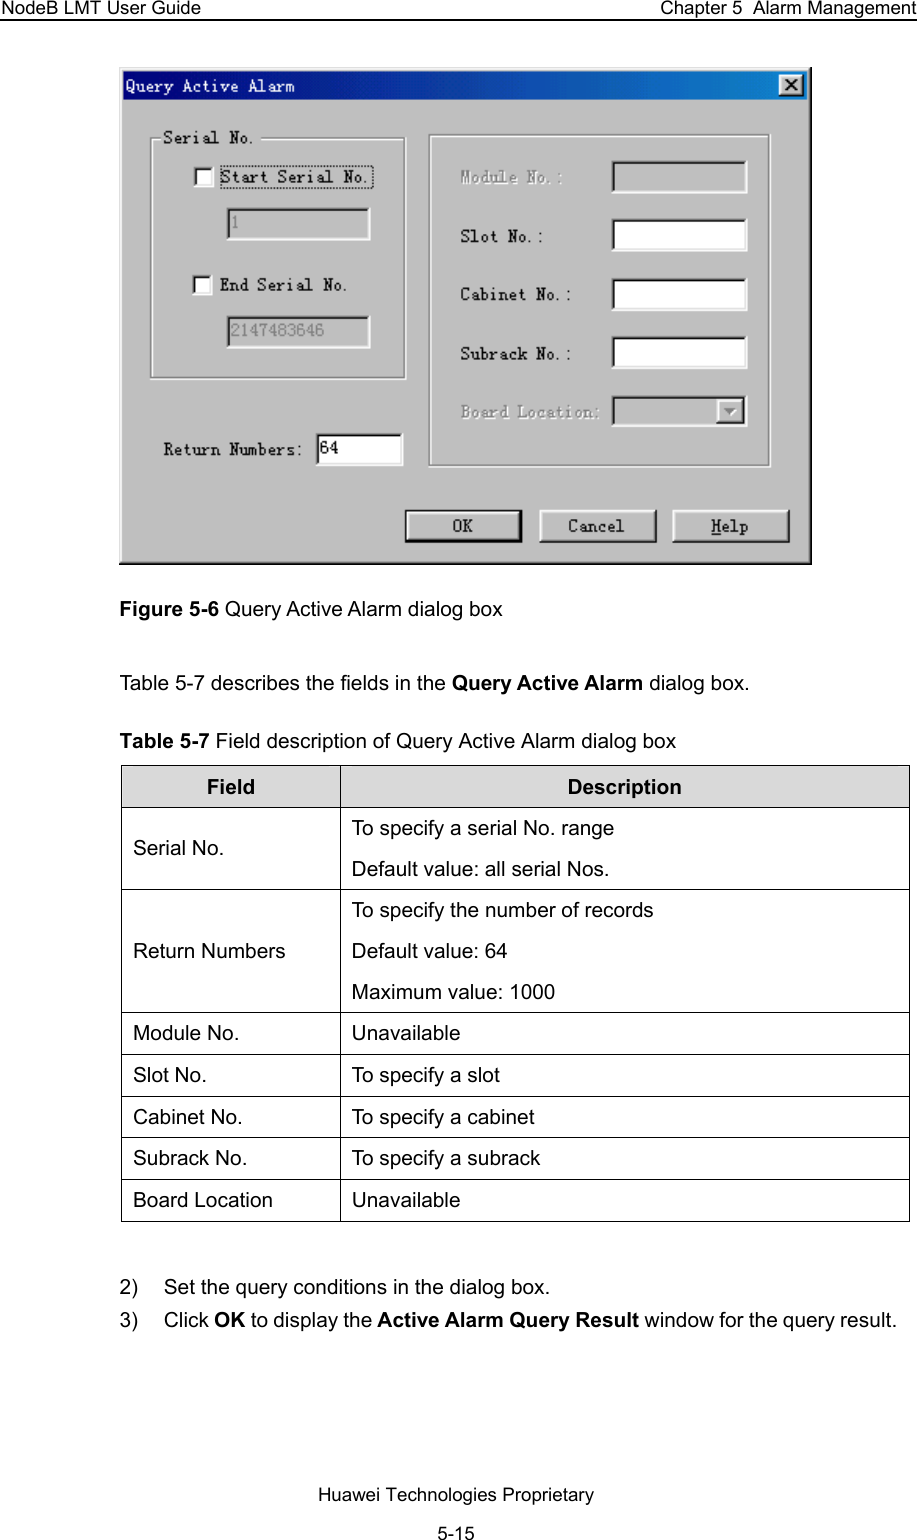 NodeB LMT User Guide  Chapter 5  Alarm Management  Figure 5-6 Query Active Alarm dialog box Table 5-7 describes the fields in the Query Active Alarm dialog box.  Table 5-7 Field description of Query Active Alarm dialog box  Field   Description  Serial No.  To specify a serial No. range Default value: all serial Nos.  Return Numbers To specify the number of records Default value: 64 Maximum value: 1000  Module No.   Unavailable  Slot No.   To specify a slot  Cabinet No.   To specify a cabinet  Subrack No.   To specify a subrack  Board Location   Unavailable   2)  Set the query conditions in the dialog box.  3) Click OK to display the Active Alarm Query Result window for the query result.   Huawei Technologies Proprietary 5-15 